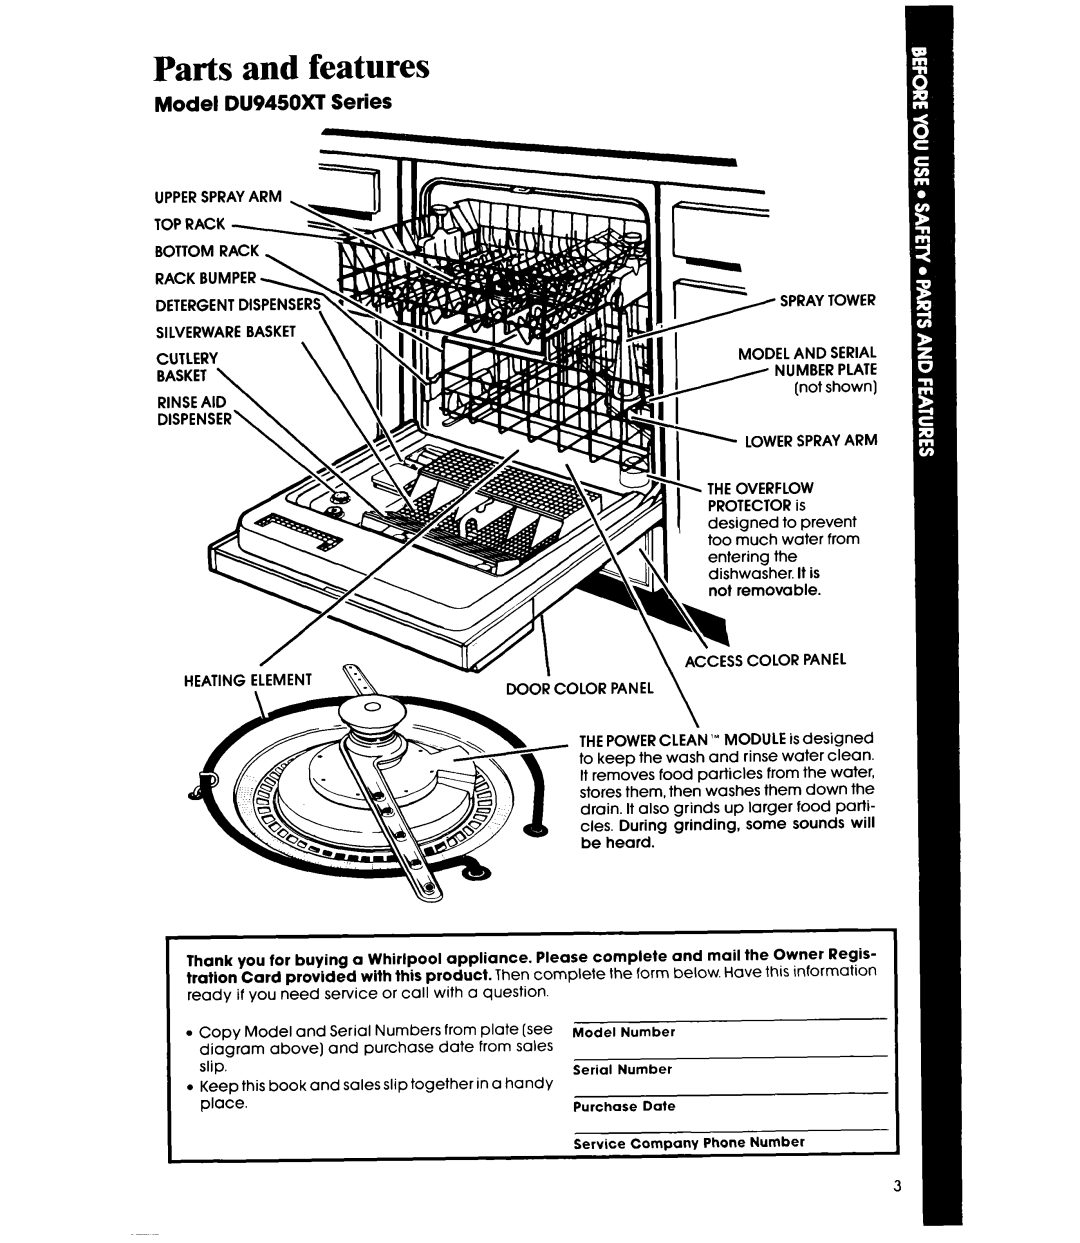 Whirlpool DU9450XT manual Parts and features, Model DU945OXT Series 